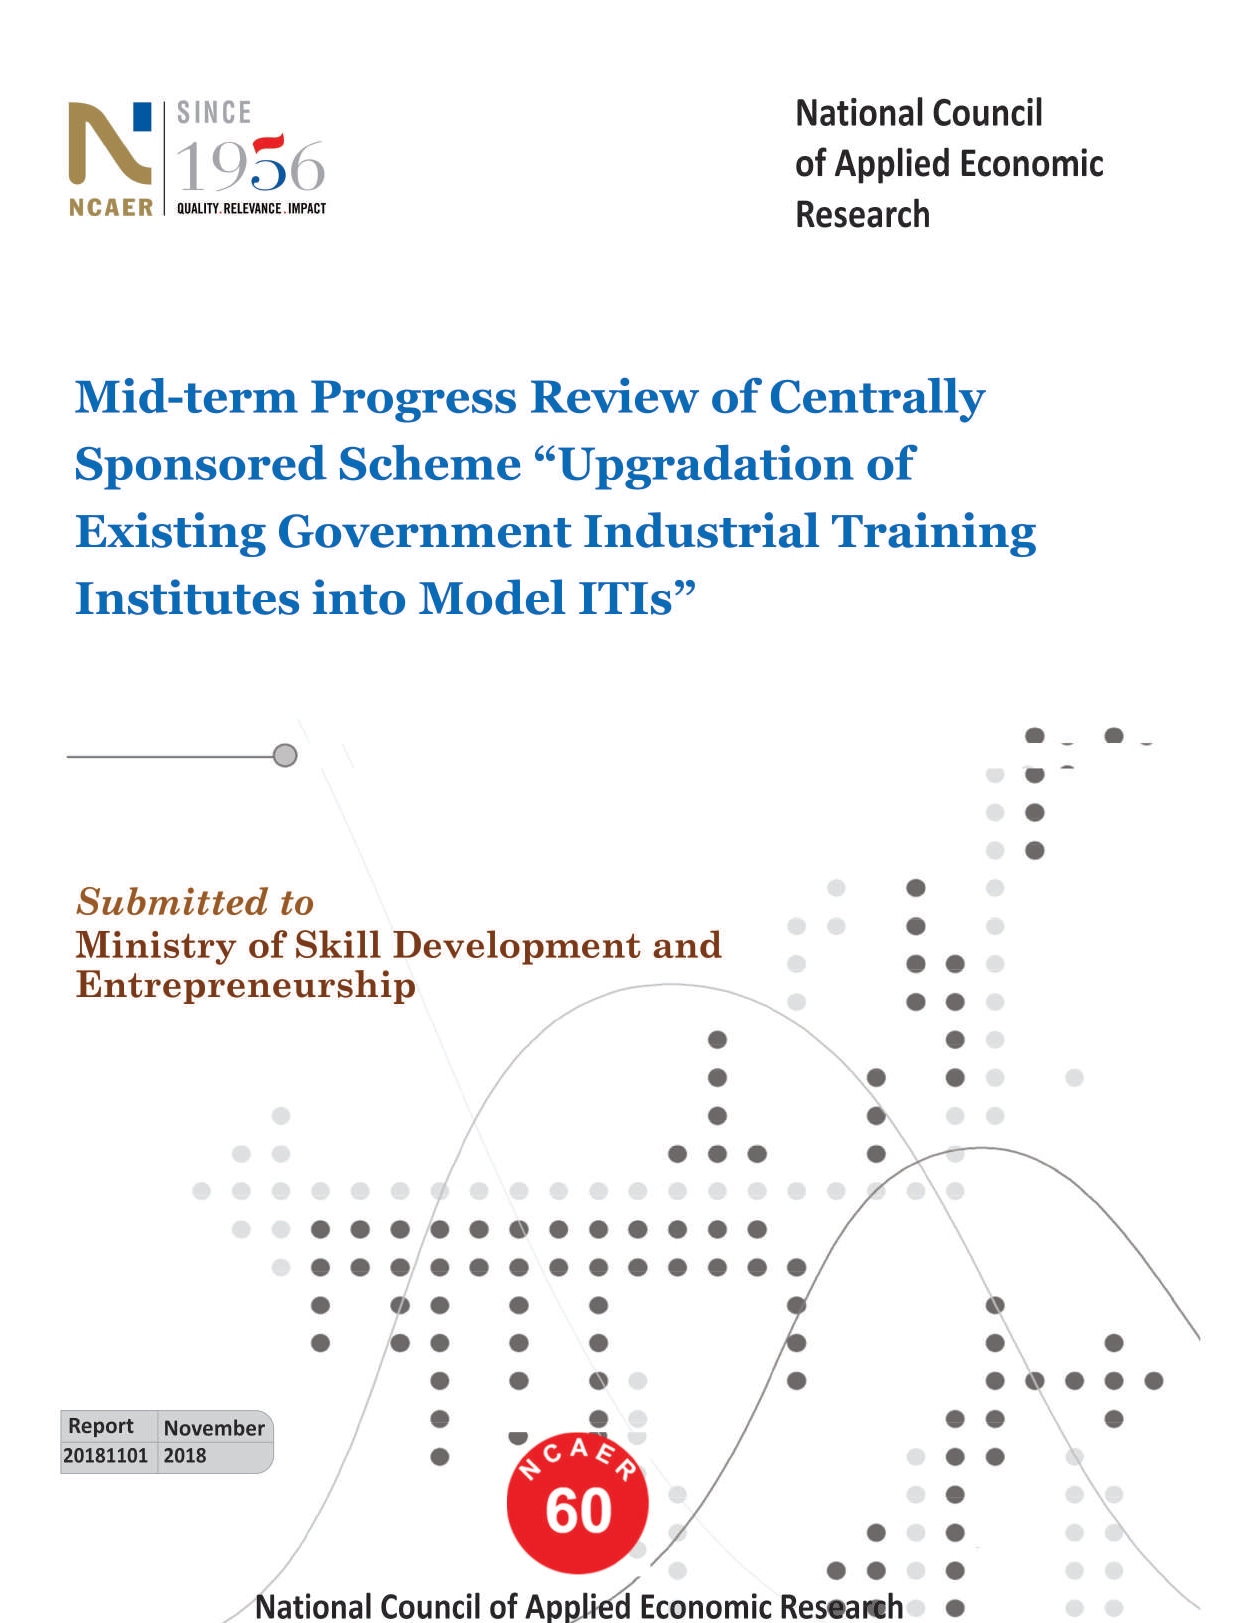 18570Mid-term Progress Review of Centrally Sponsored Scheme “Upgradation of Existing Government Industrial Training Institutes into Model ITIs”